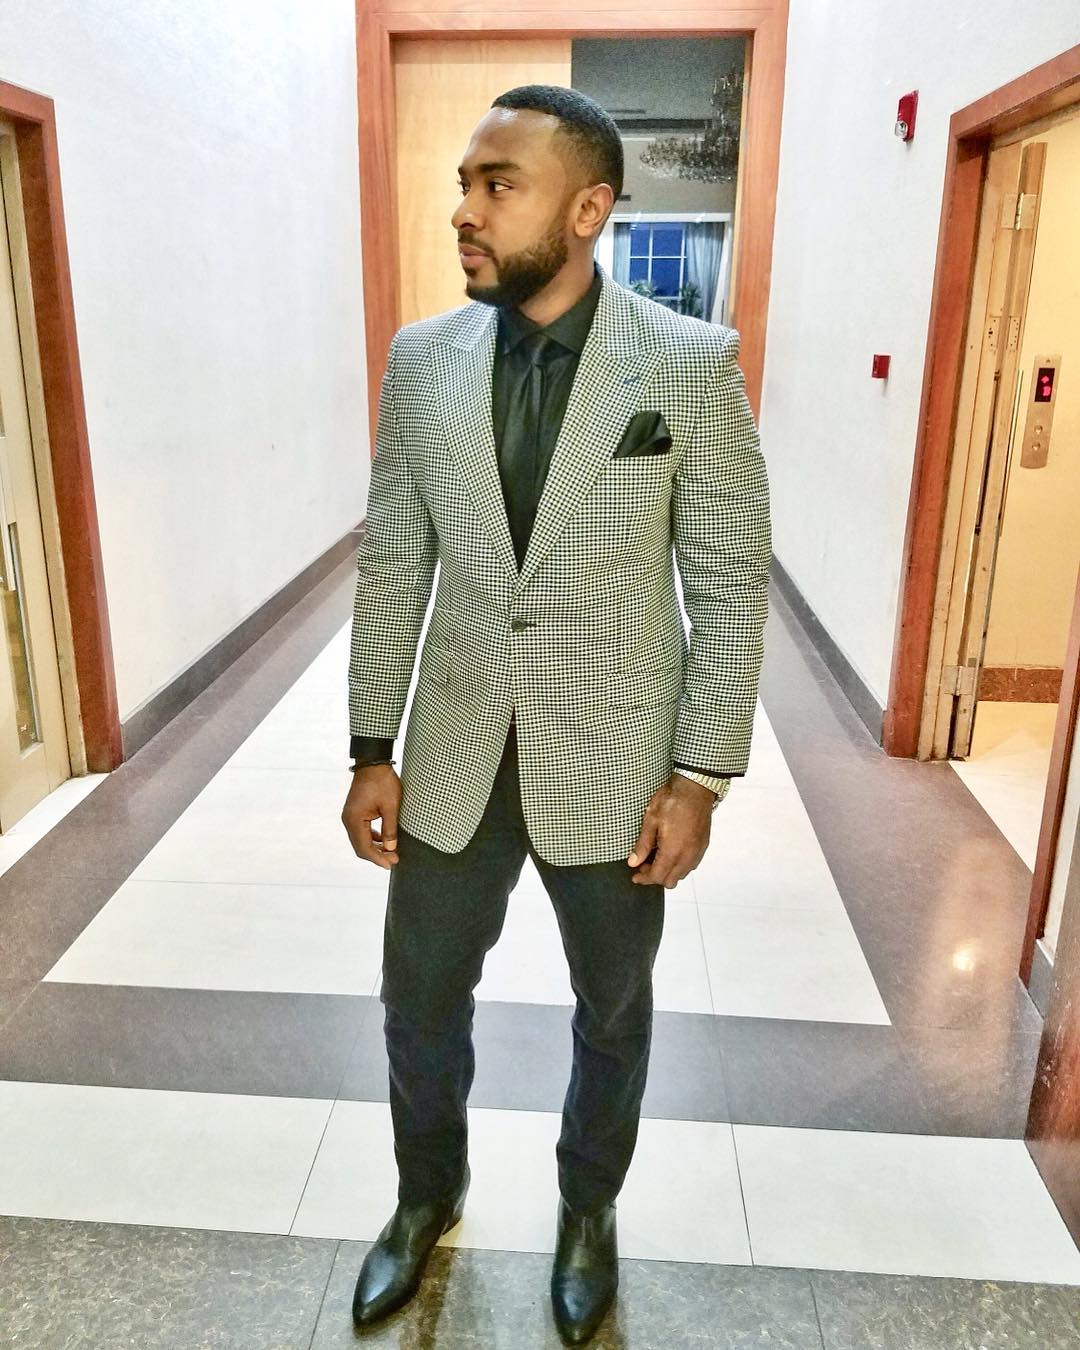 Enyinna Nwigwe shows swag in his outfit